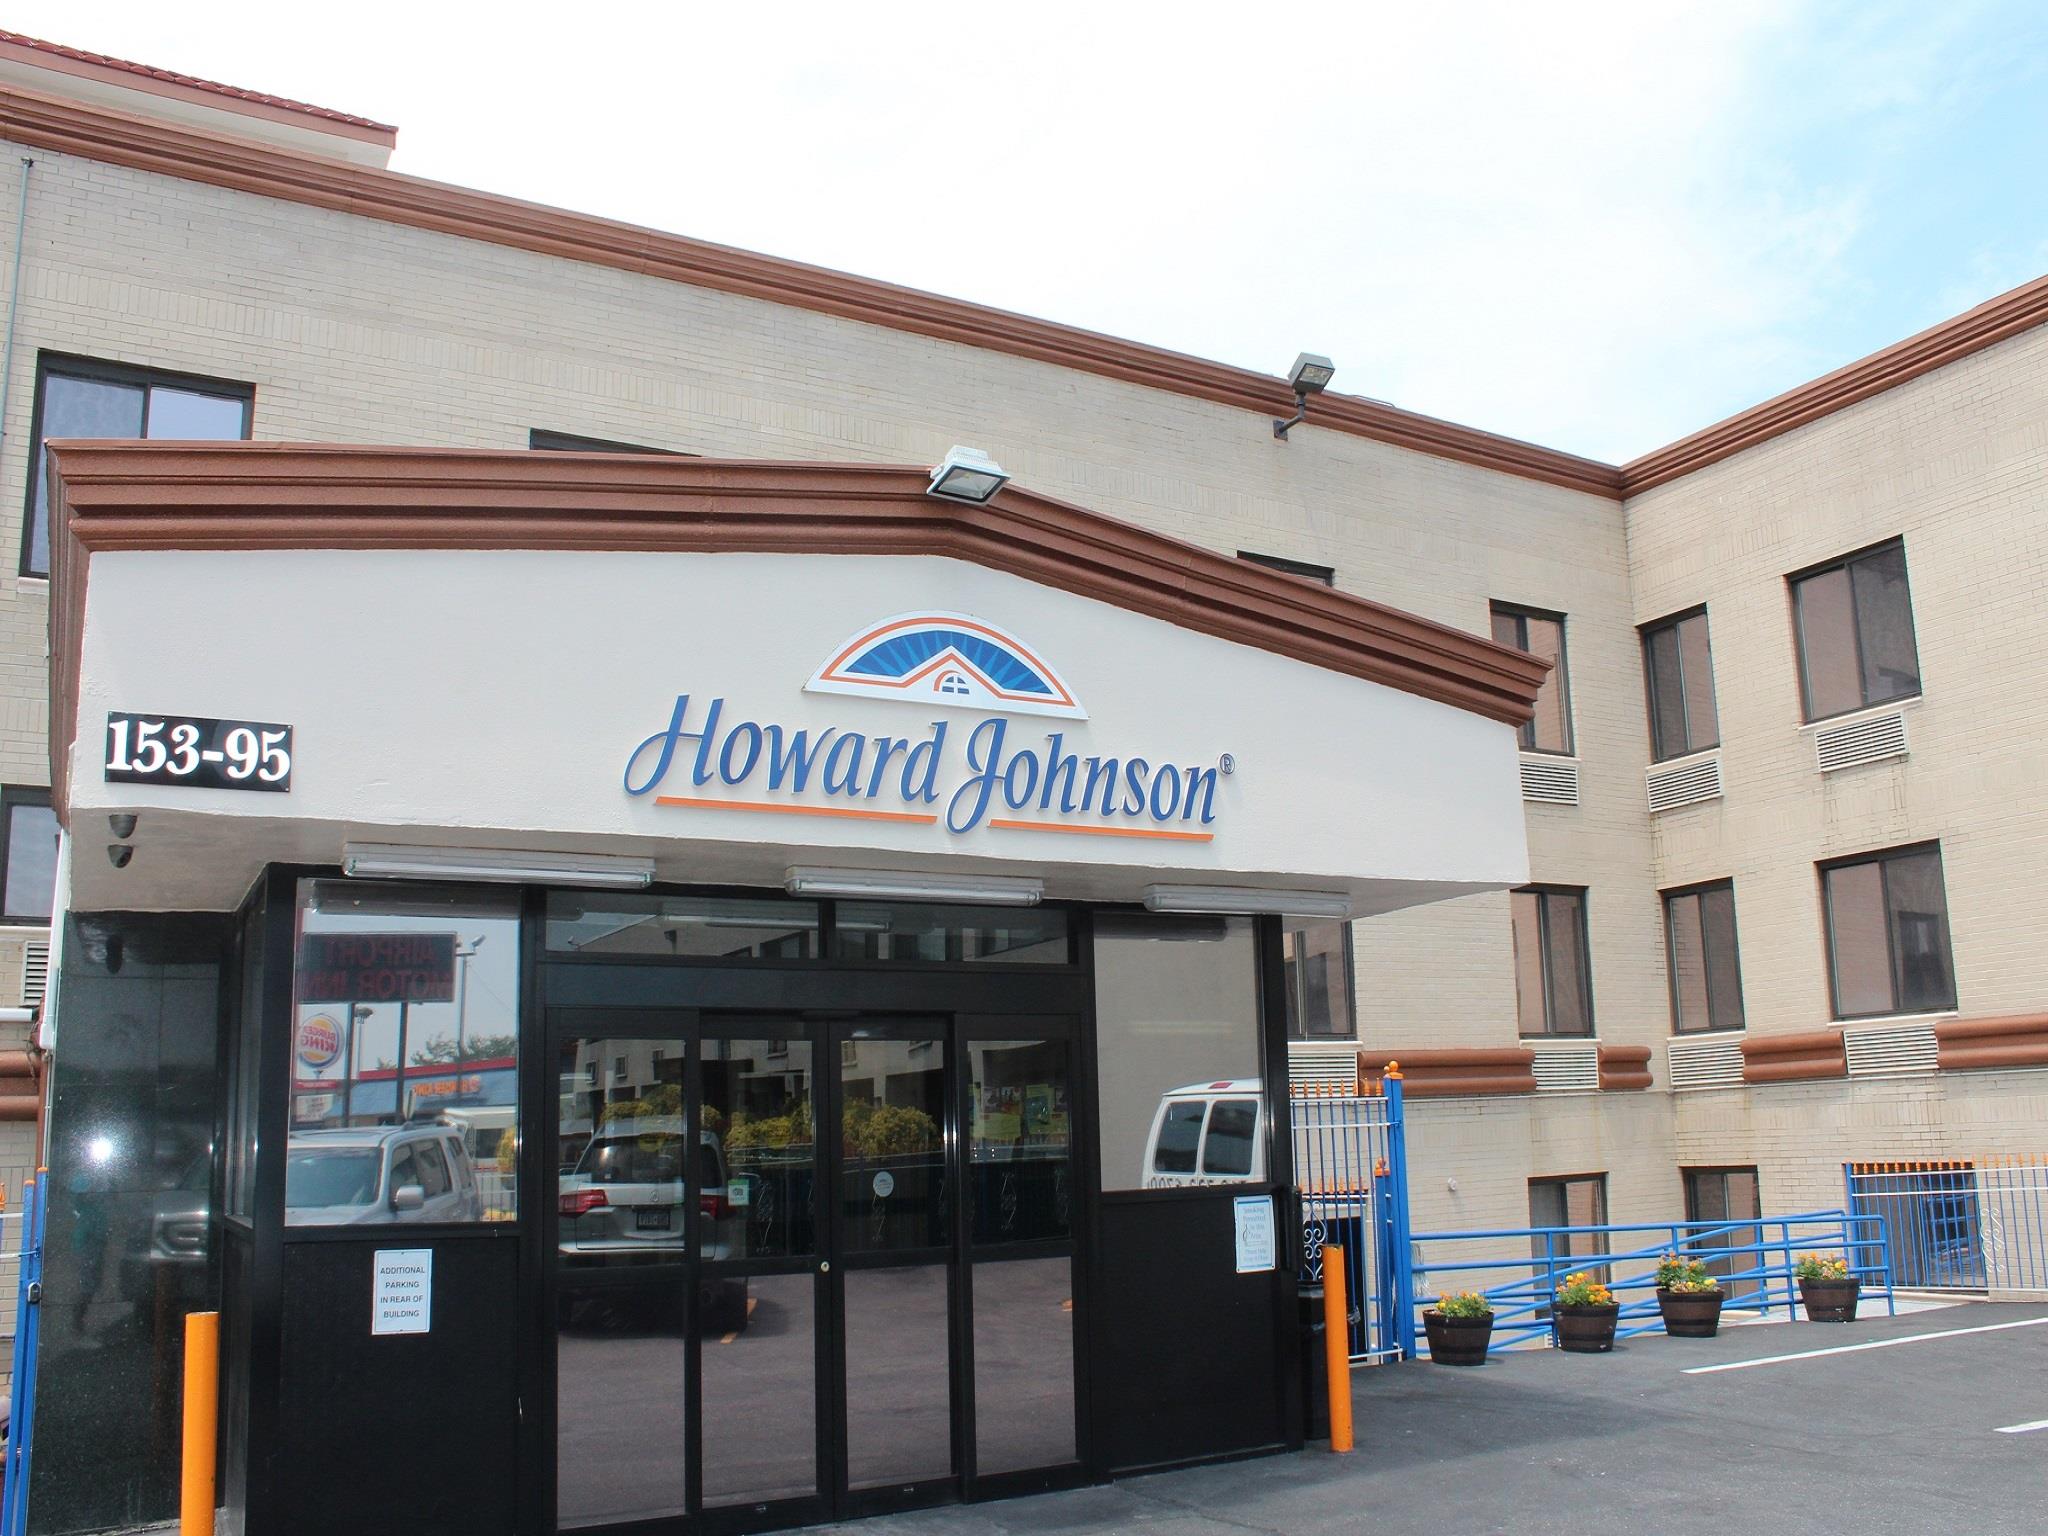 Howard Johnson Inn Jamaica JFK Airport NY New York State 
 FAQ 2016, What facilities are there in Howard Johnson Inn Jamaica JFK Airport NY New York State 
 2016, What Languages Spoken are Supported in Howard Johnson Inn Jamaica JFK Airport NY New York State 
 2016, Which payment cards are accepted in Howard Johnson Inn Jamaica JFK Airport NY New York State 
 , New York State 
 Howard Johnson Inn Jamaica JFK Airport NY room facilities and services Q&A 2016, New York State 
 Howard Johnson Inn Jamaica JFK Airport NY online booking services 2016, New York State 
 Howard Johnson Inn Jamaica JFK Airport NY address 2016, New York State 
 Howard Johnson Inn Jamaica JFK Airport NY telephone number 2016,New York State 
 Howard Johnson Inn Jamaica JFK Airport NY map 2016, New York State 
 Howard Johnson Inn Jamaica JFK Airport NY traffic guide 2016, how to go New York State 
 Howard Johnson Inn Jamaica JFK Airport NY, New York State 
 Howard Johnson Inn Jamaica JFK Airport NY booking online 2016, New York State 
 Howard Johnson Inn Jamaica JFK Airport NY room types 2016.